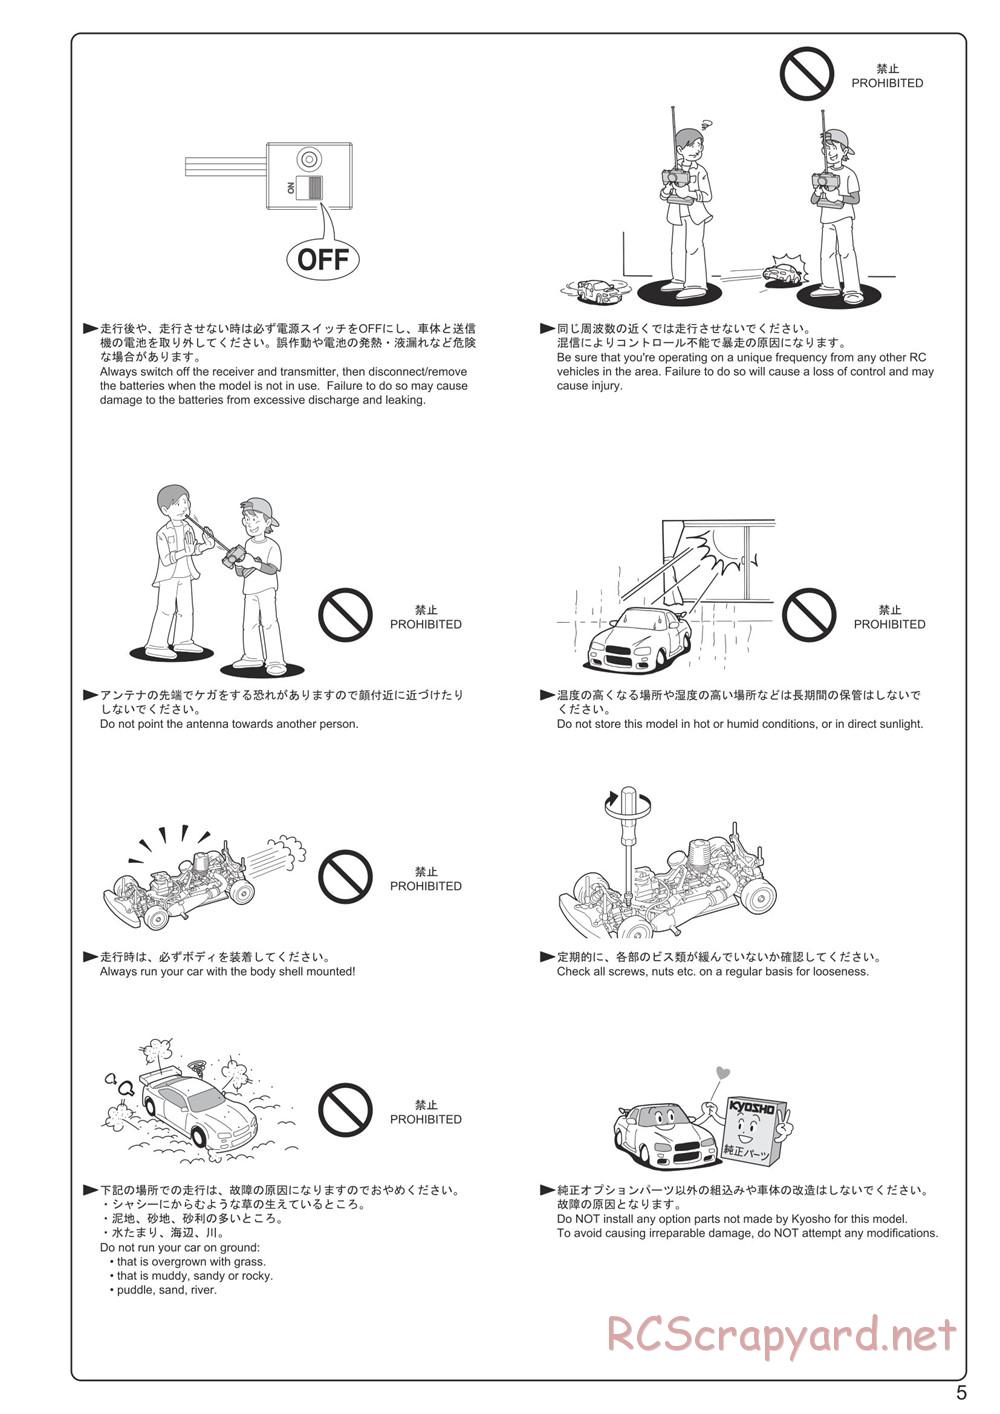 Kyosho - Ultima RB7 - Manual - Page 5